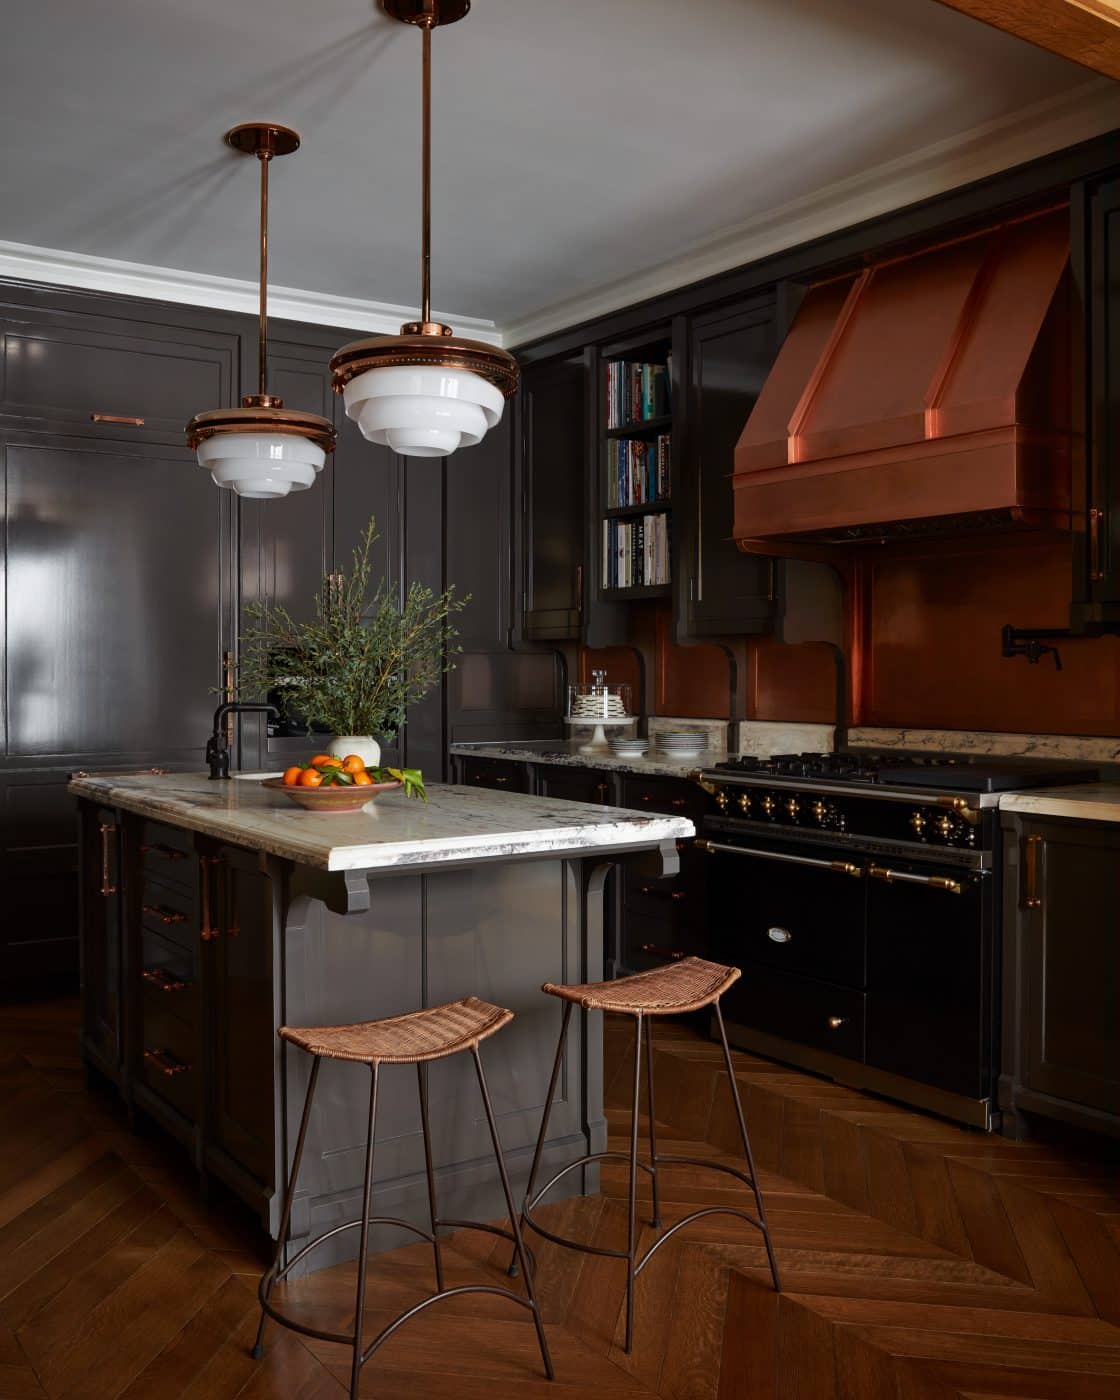 Kitchen of apartment in Fitzroy building in New York City by interior designer Shawn Henderson